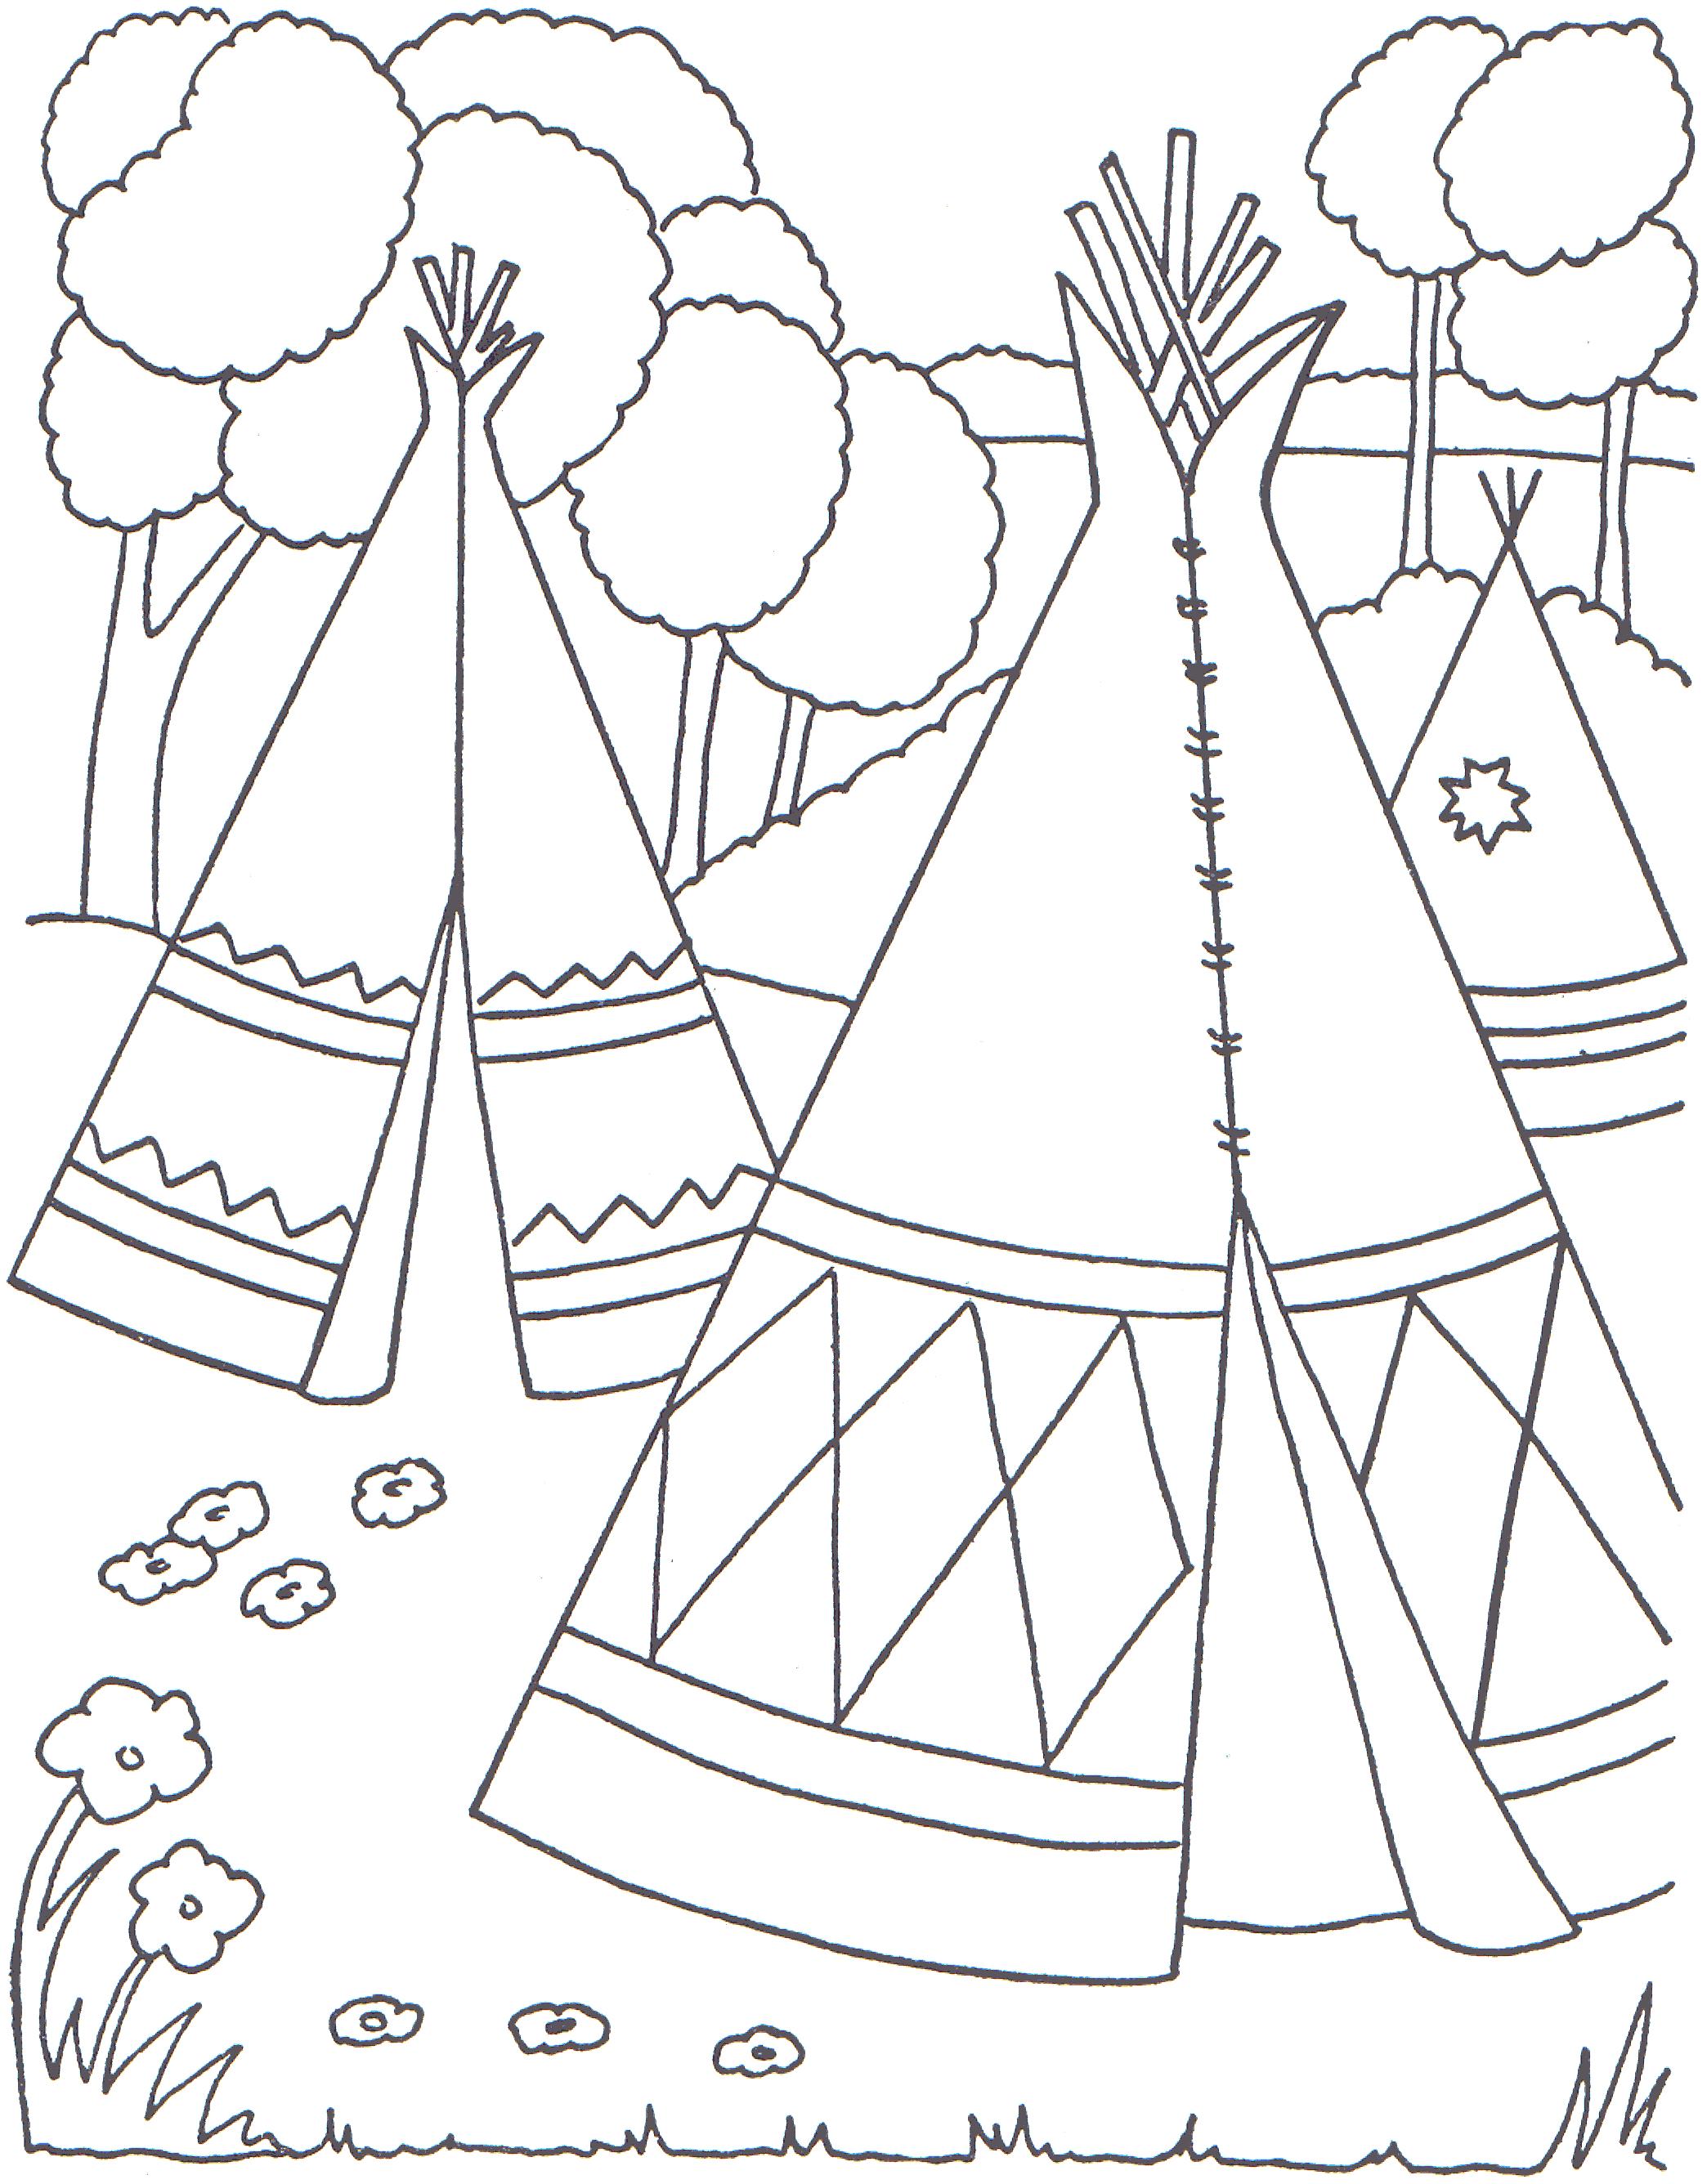  Indian Coloring Pages Village | Print Coloring Pages